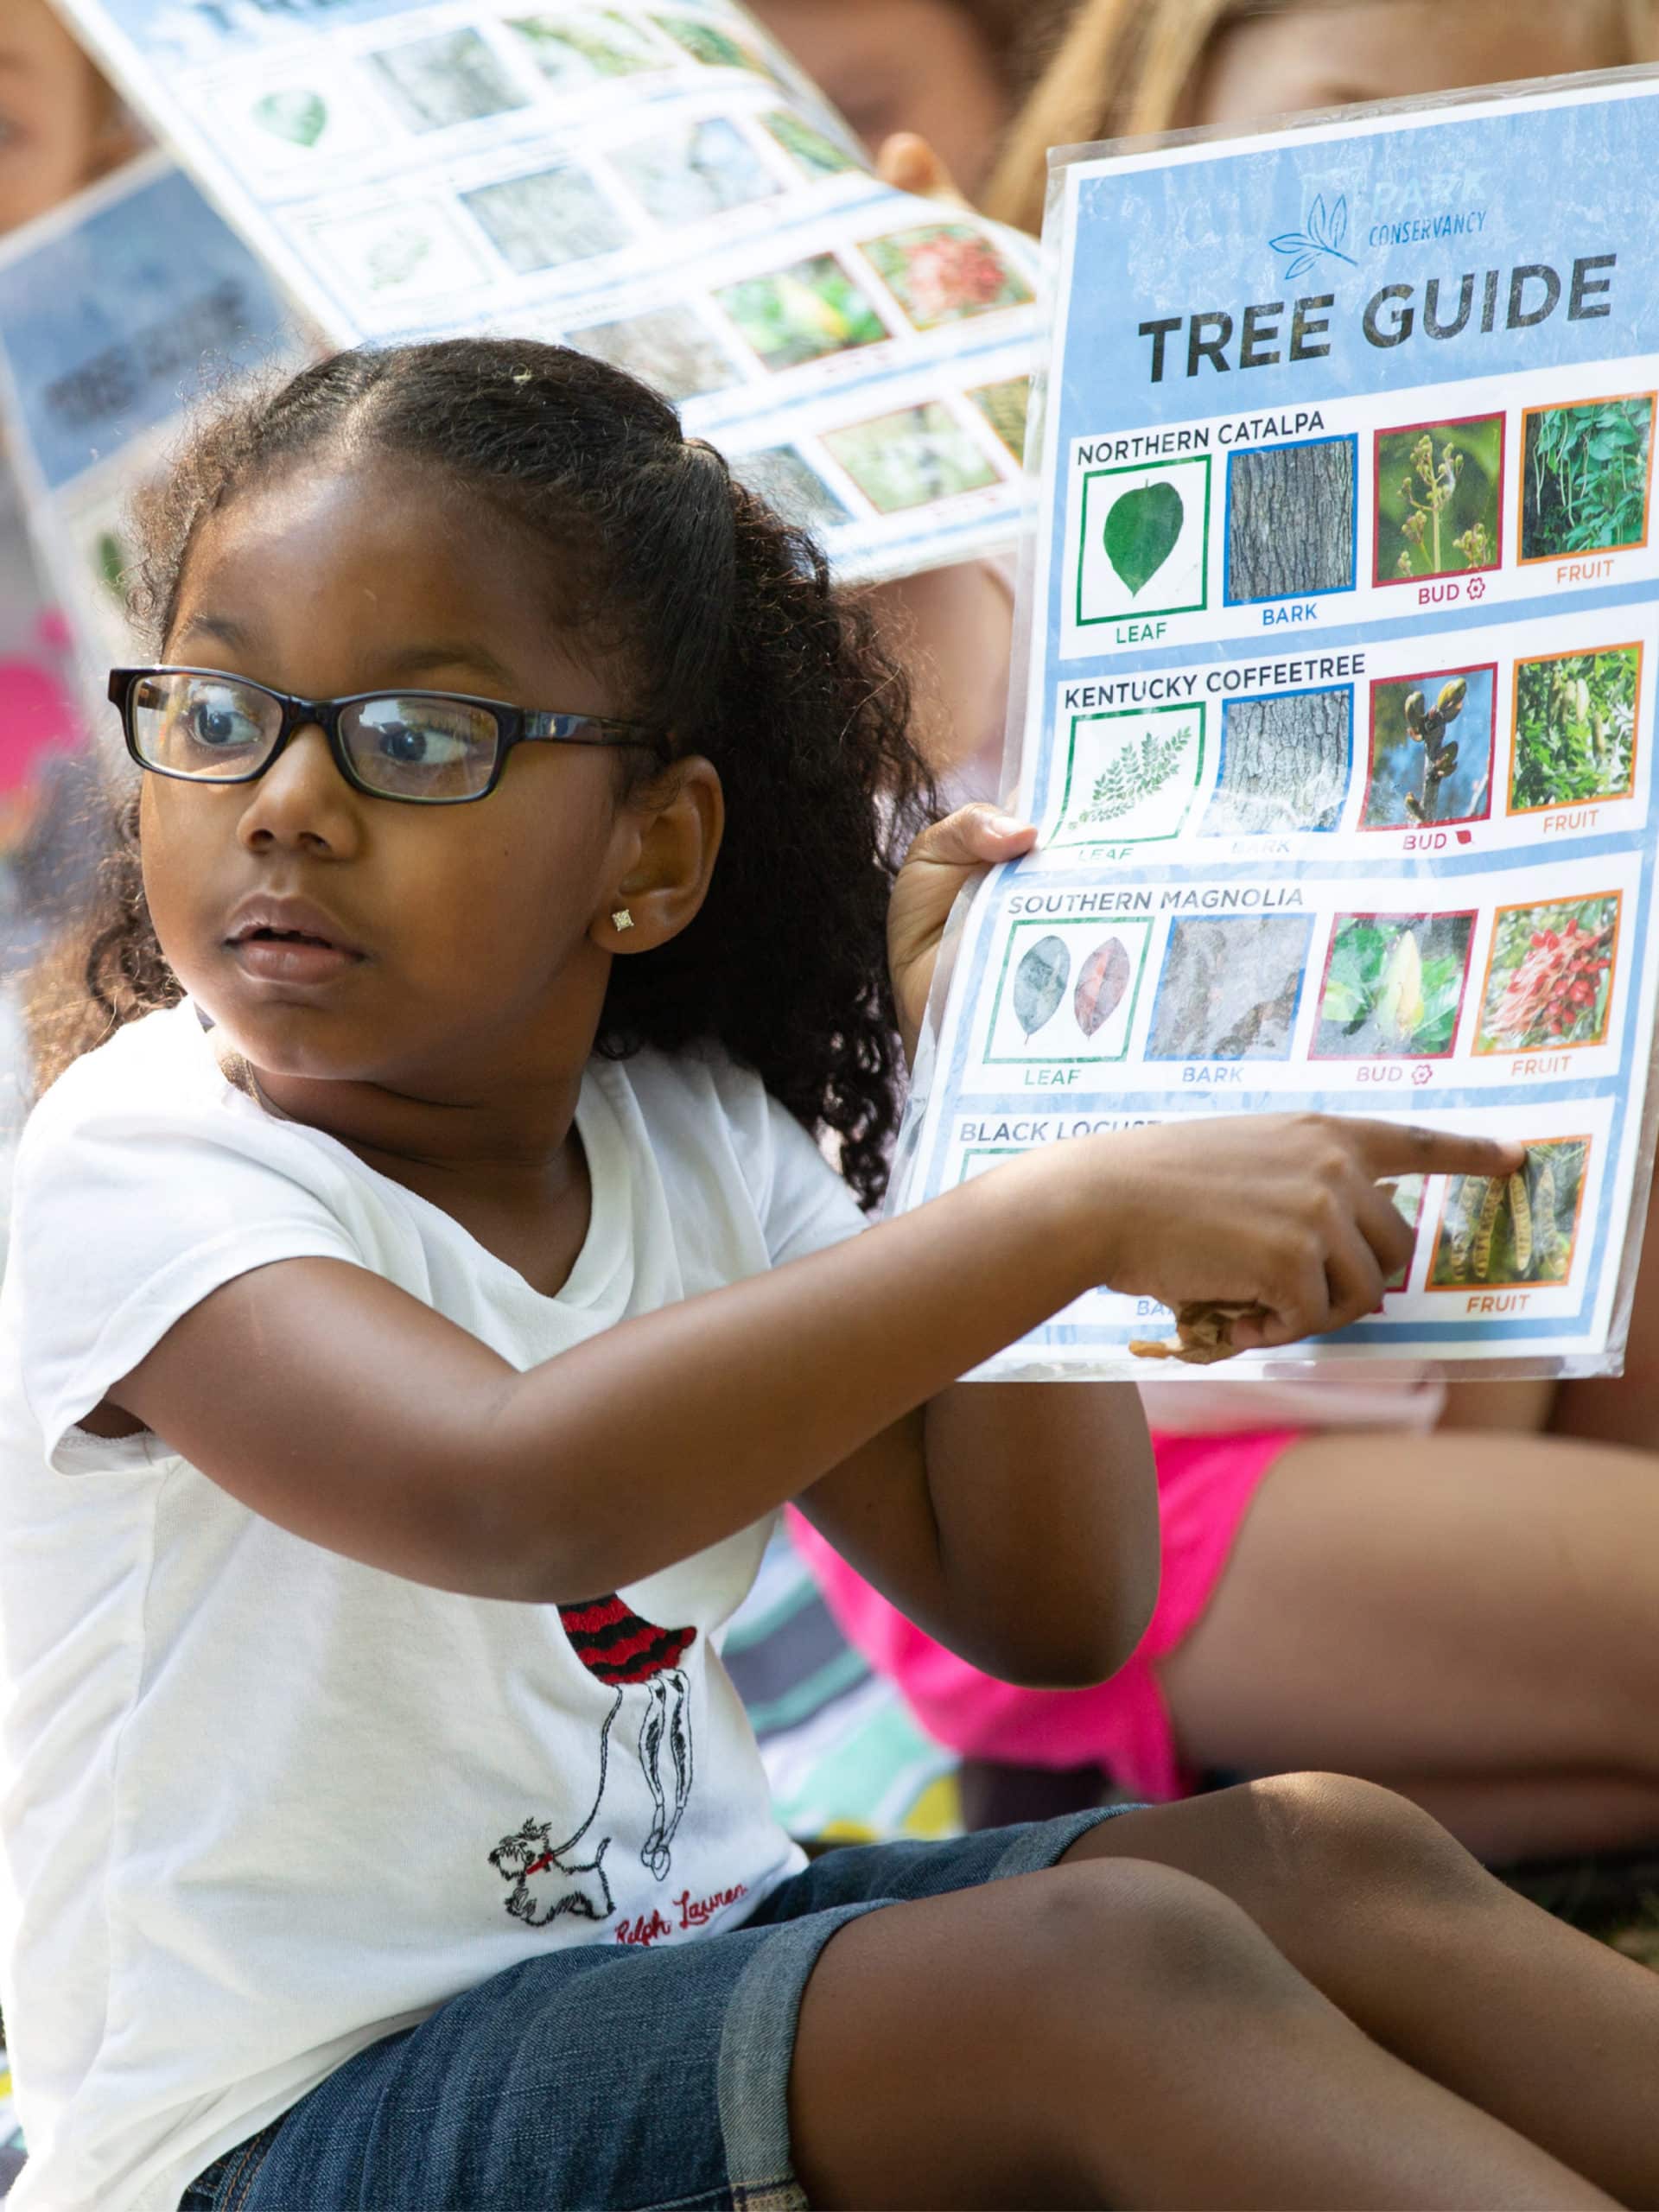 Young girl pointing to picture on a tree guide.